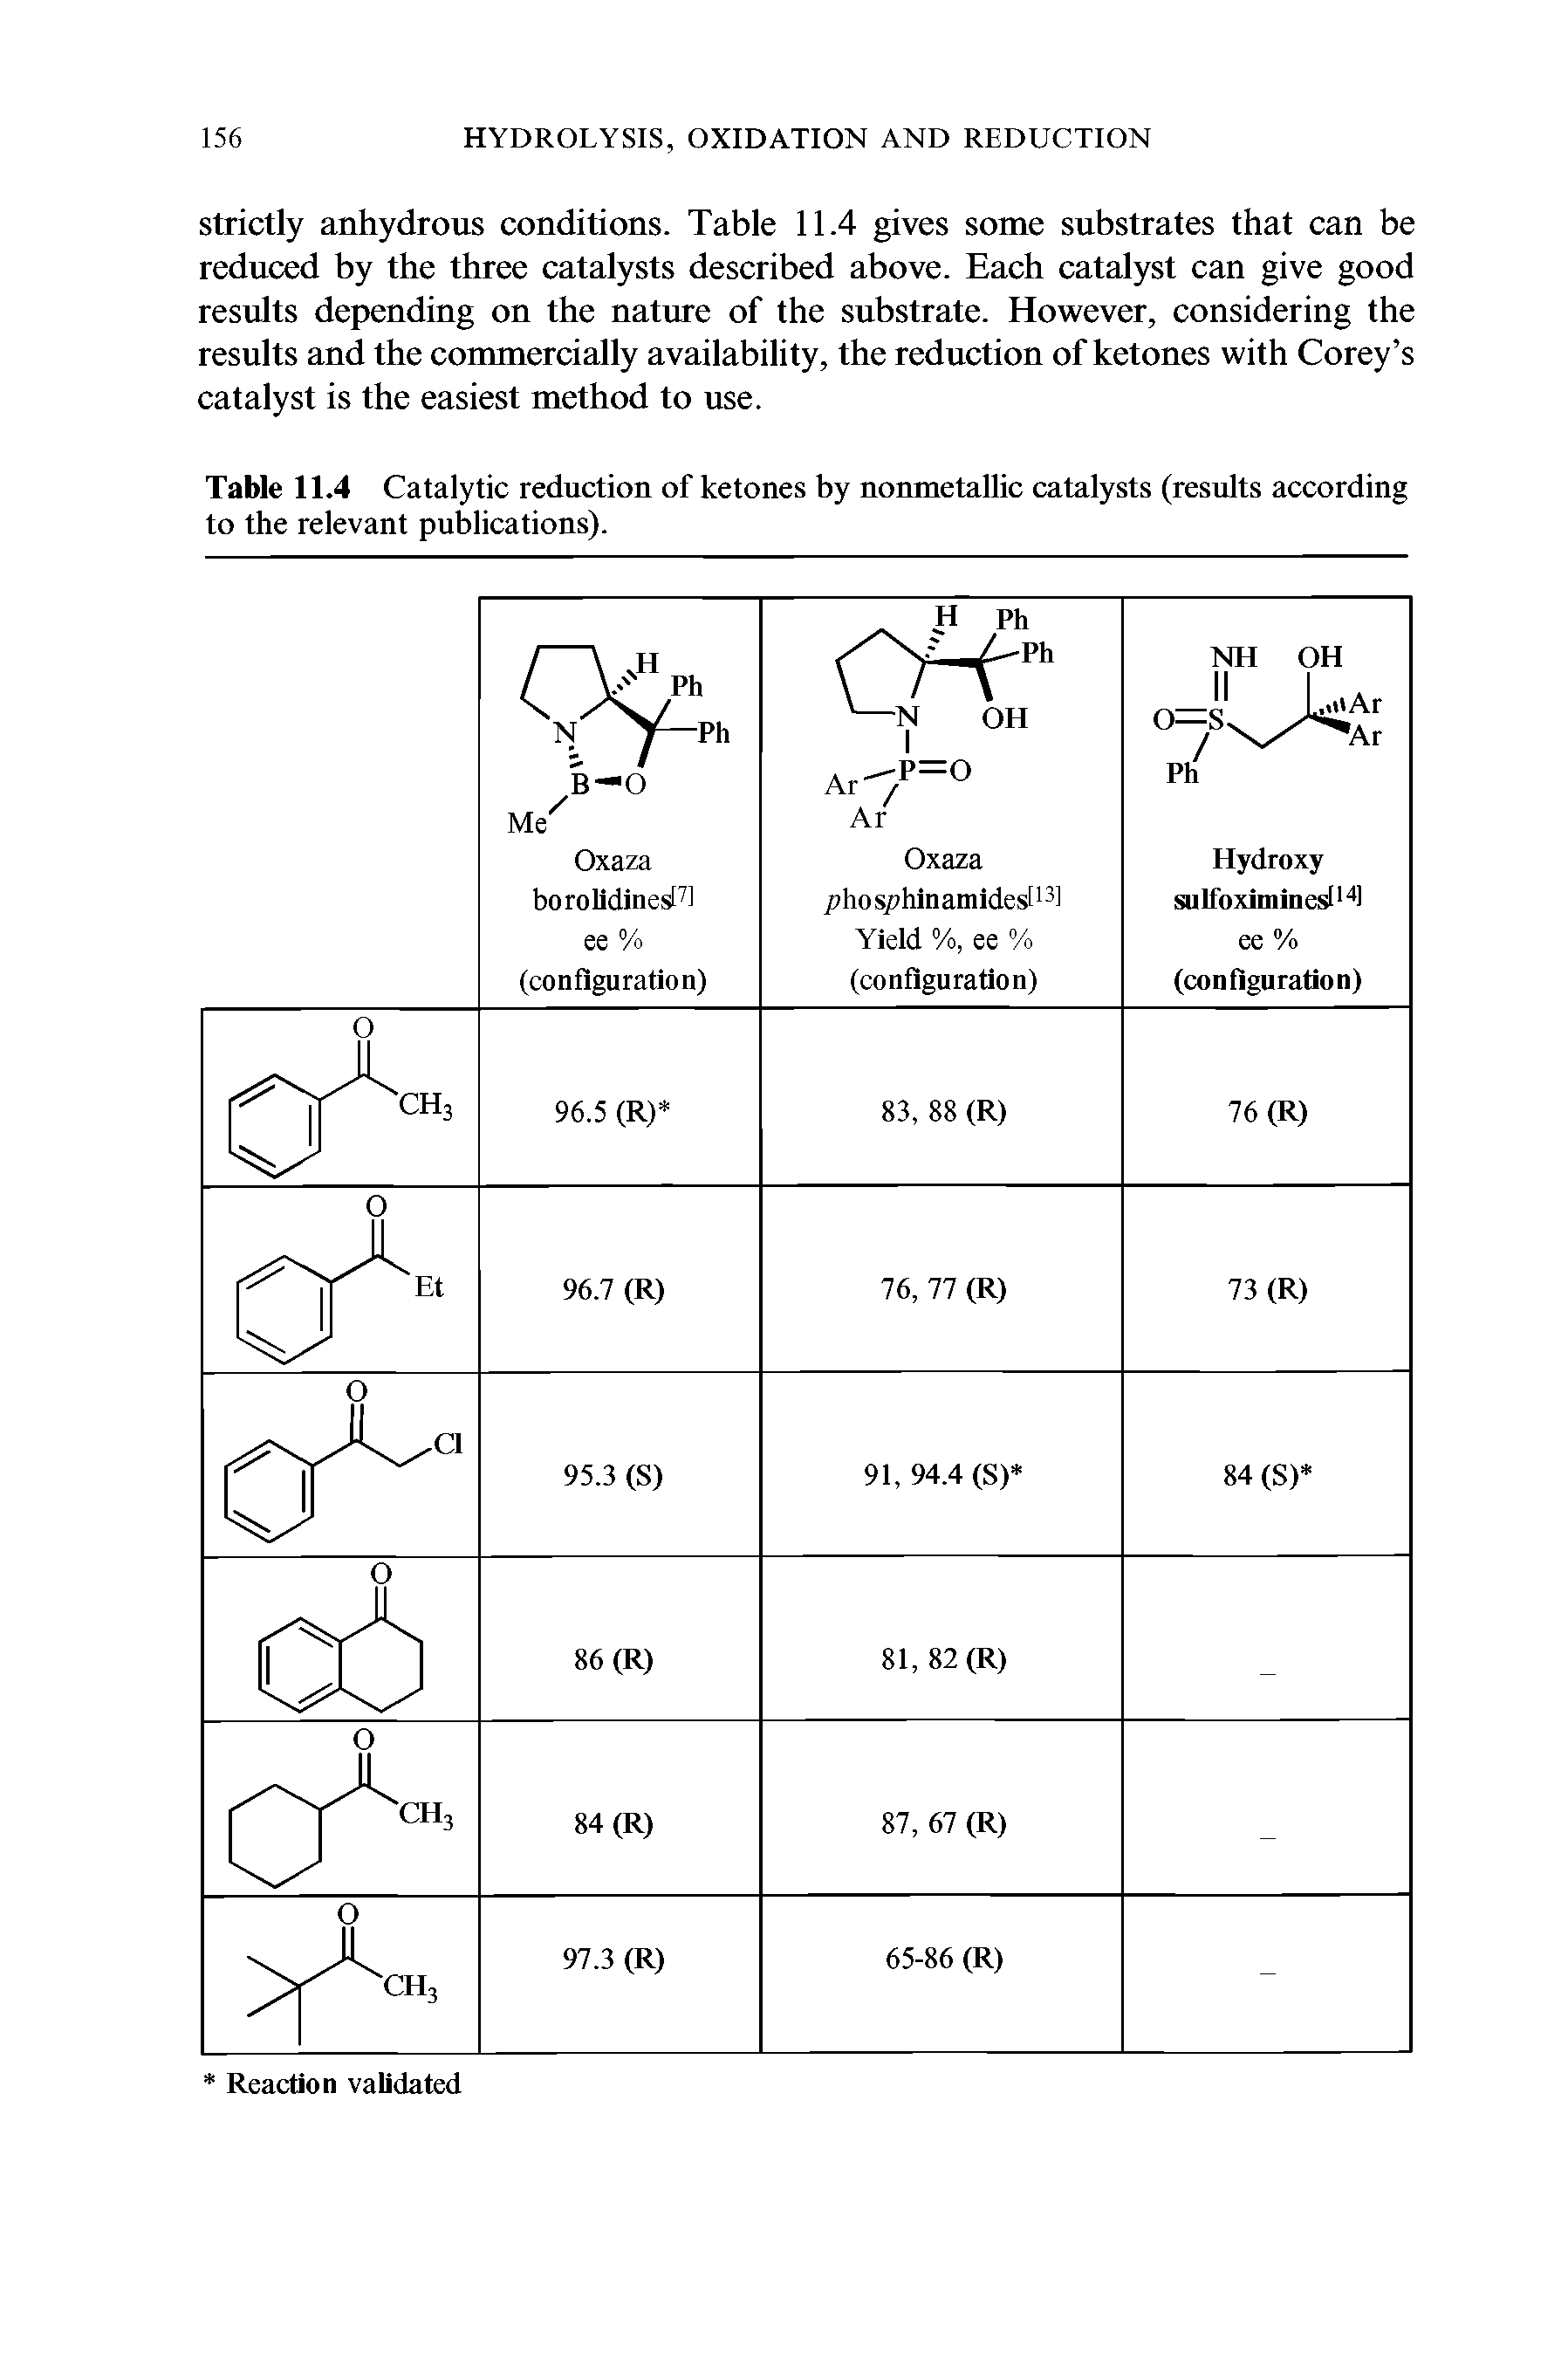 Table 11.4 Catalytic reduction of ketones by nonmetallic catalysts (results according to the relevant publications).